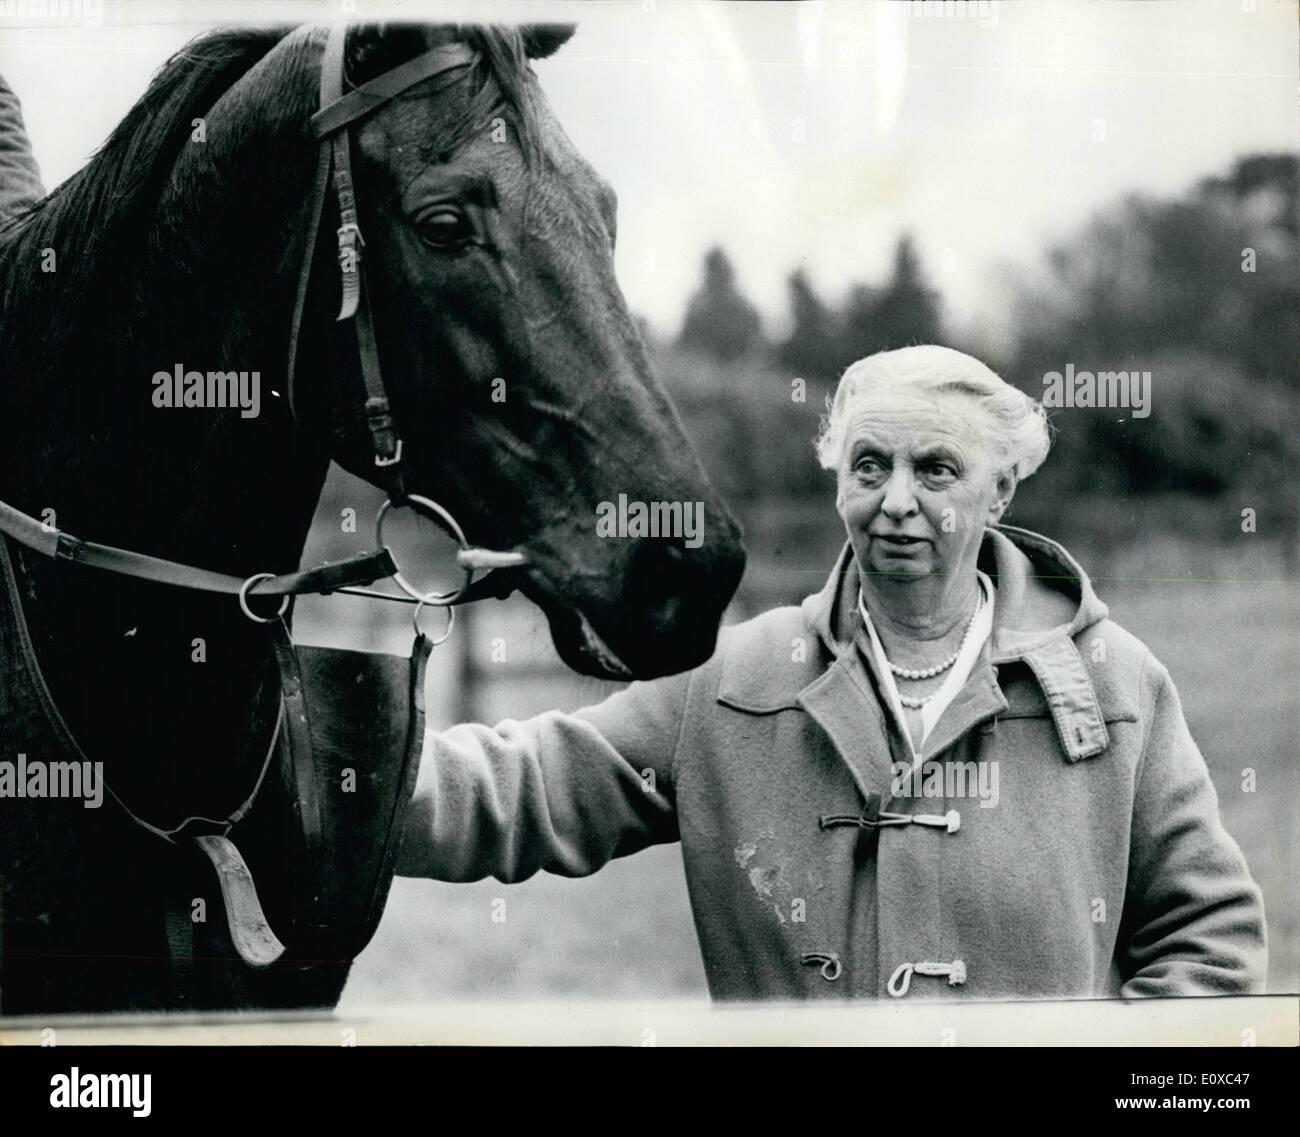 Feb. 02, 1966 - 70-YEAR-OLD WOMAN RACEHORSE TRAINER WILL TAKE LEGAL ACTION AGAINST JOCKEY CLUB STEWARDS. FLORENCE NAGIE was busy today training racehorses, as she has done for the past 28 years. But first she posted her fifth application for a trainer's licence to the Jockey club. She knows they will refuse it, just as they refused the others-BECAUSE SHE IS A WOMAN. But this time she does not mind. For on Wednesday three appeal court judges told her she could go ahead with her legal action against the Jockey club Stewards Stock Photo